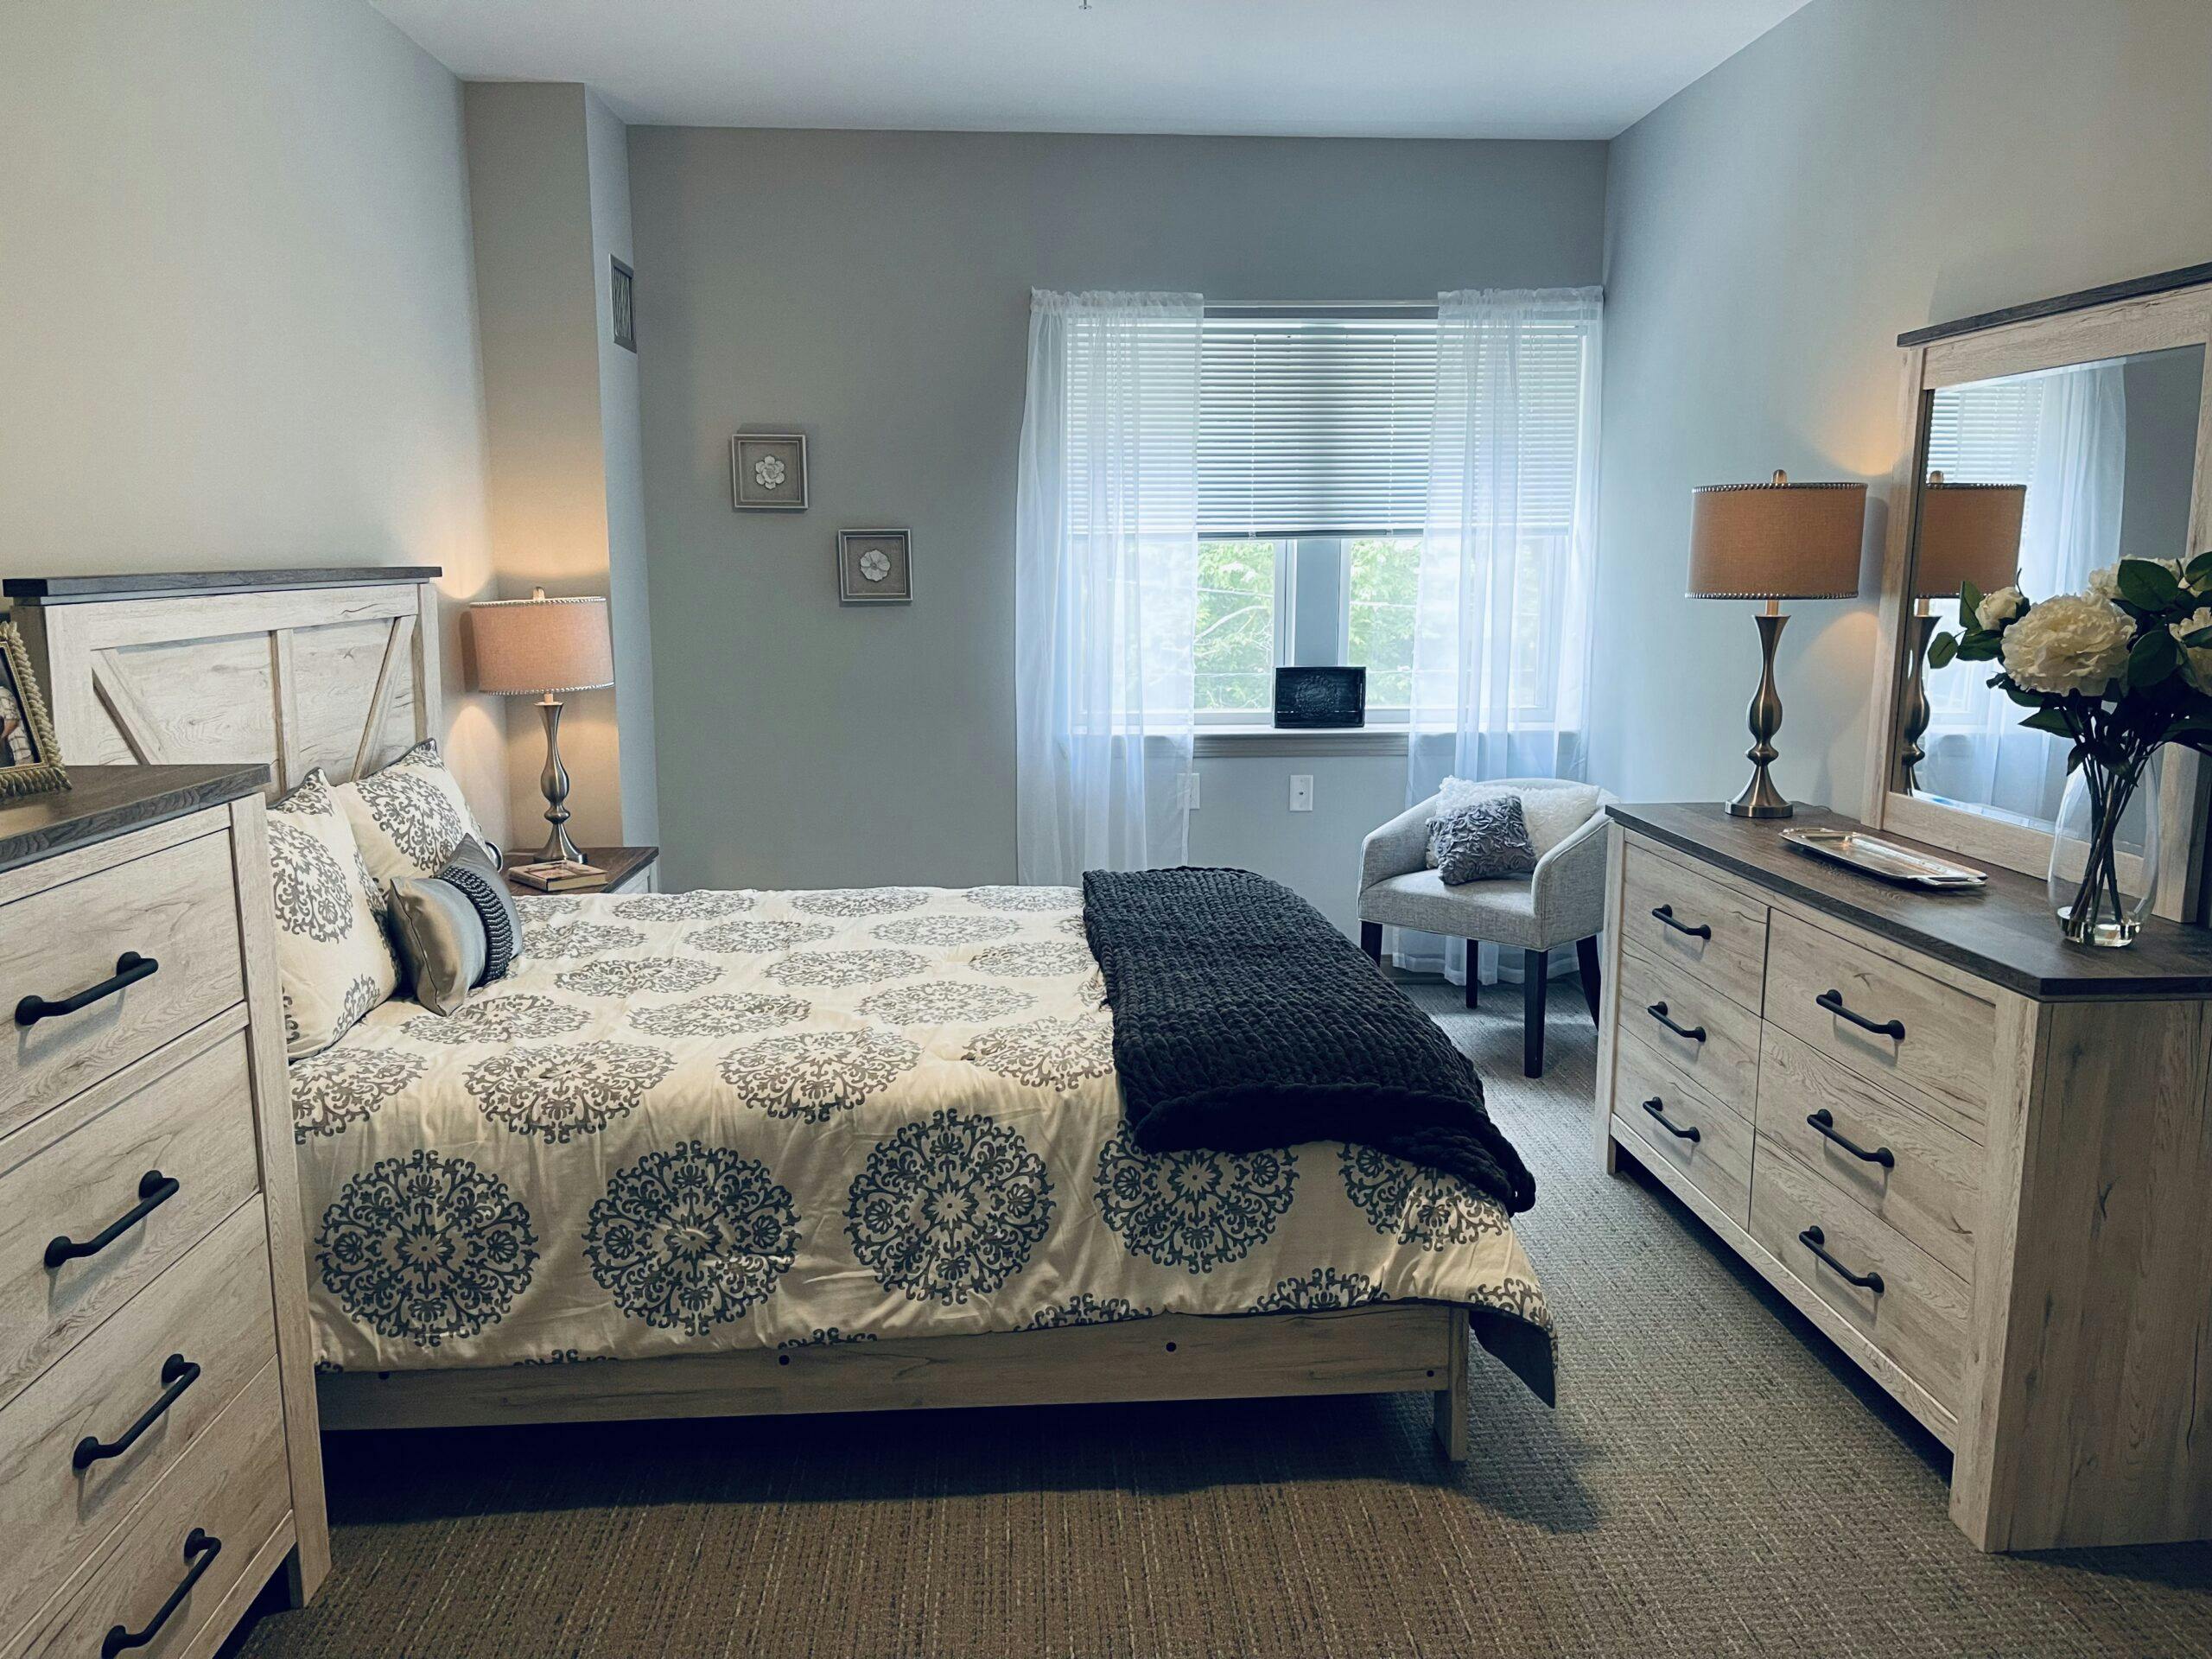 An assisted living bedroom with a bed, dresser, and mirror.